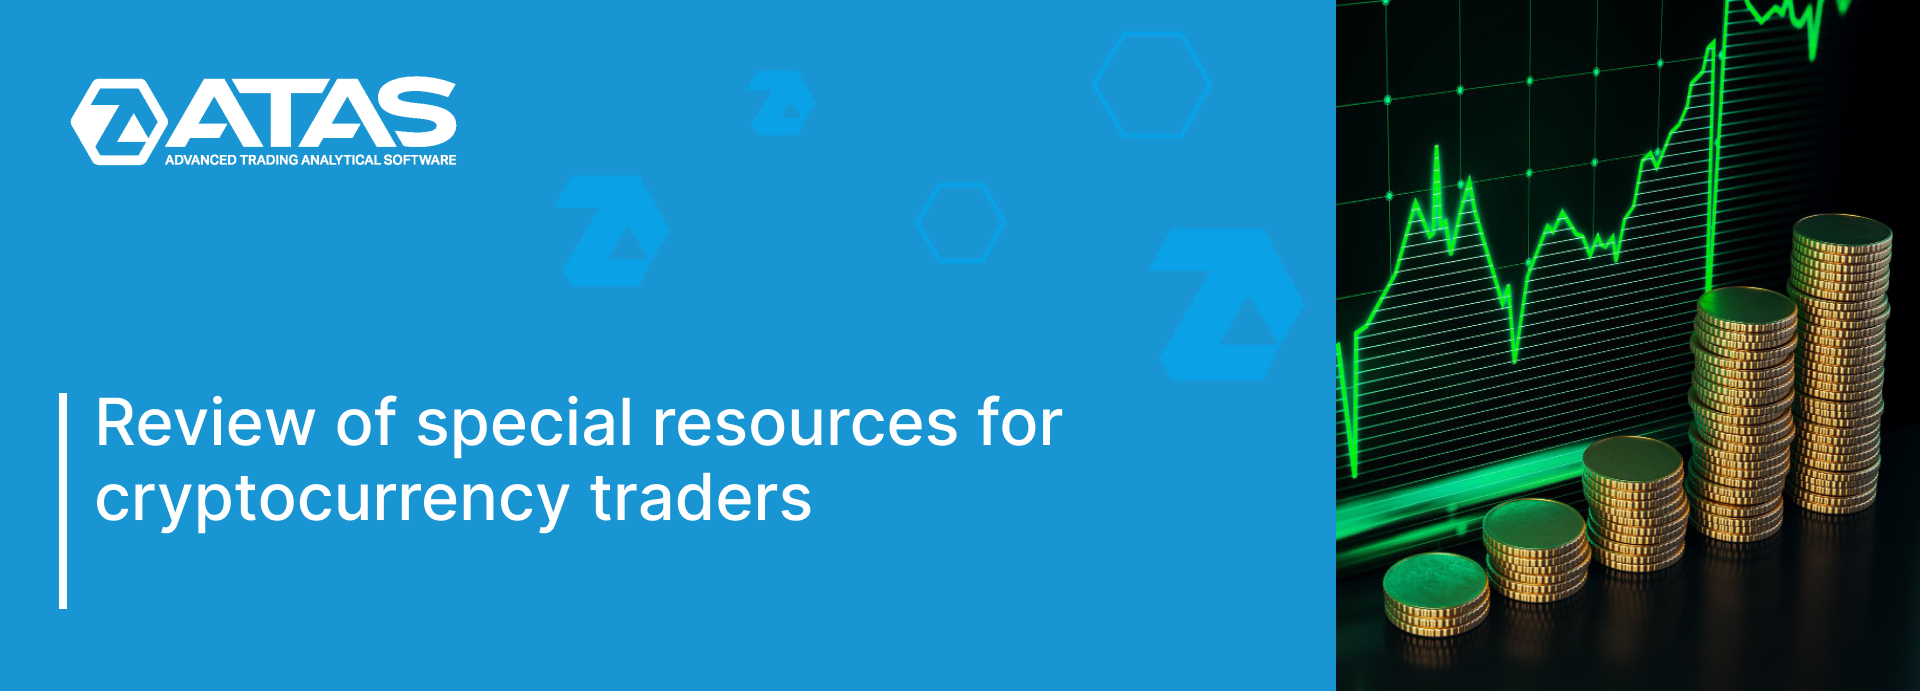 Special resources for cryptocurrency traders